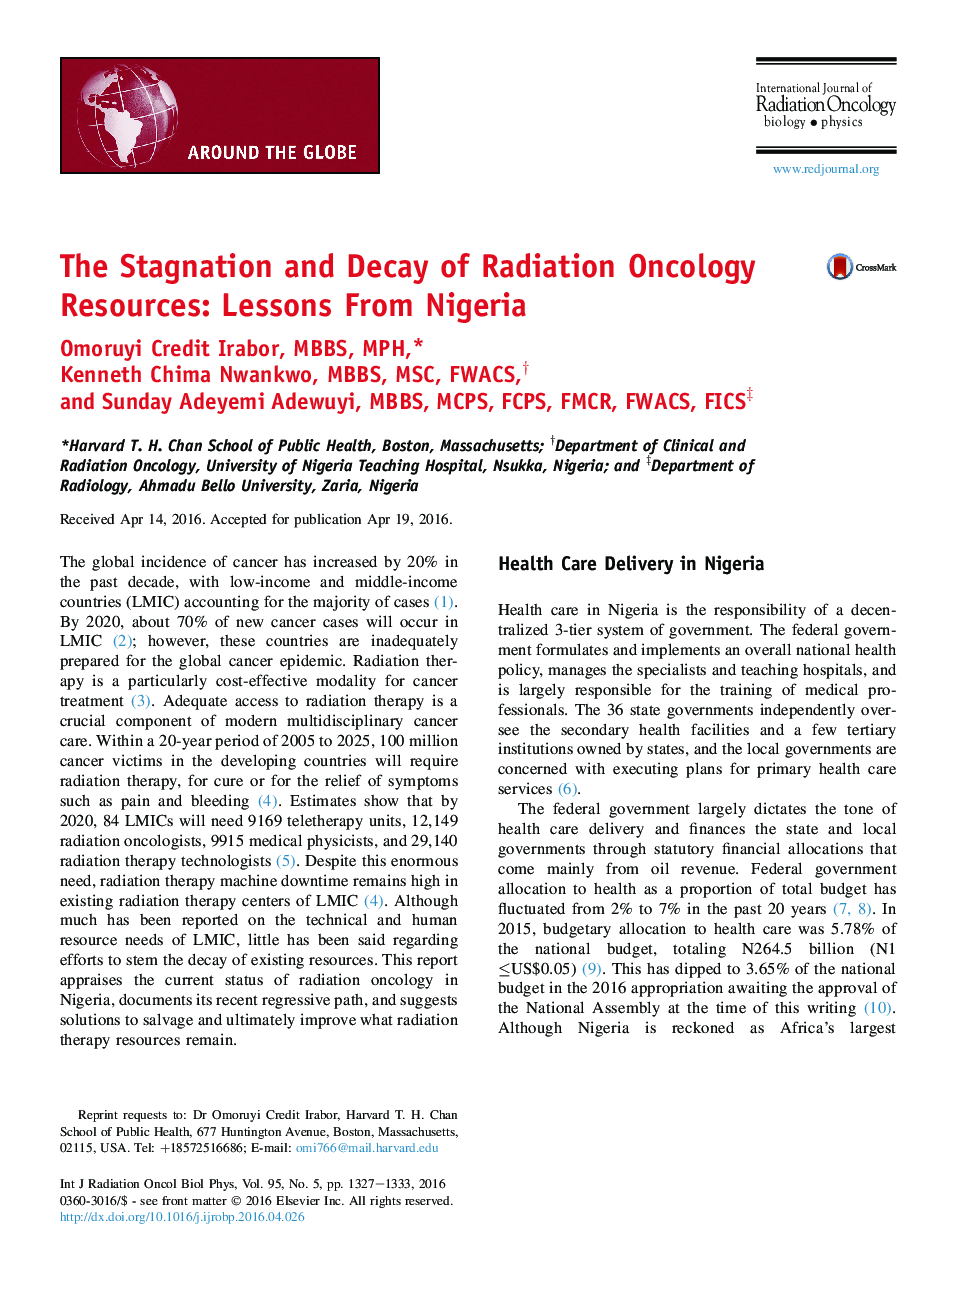 The Stagnation and Decay of Radiation Oncology Resources: Lessons From Nigeria